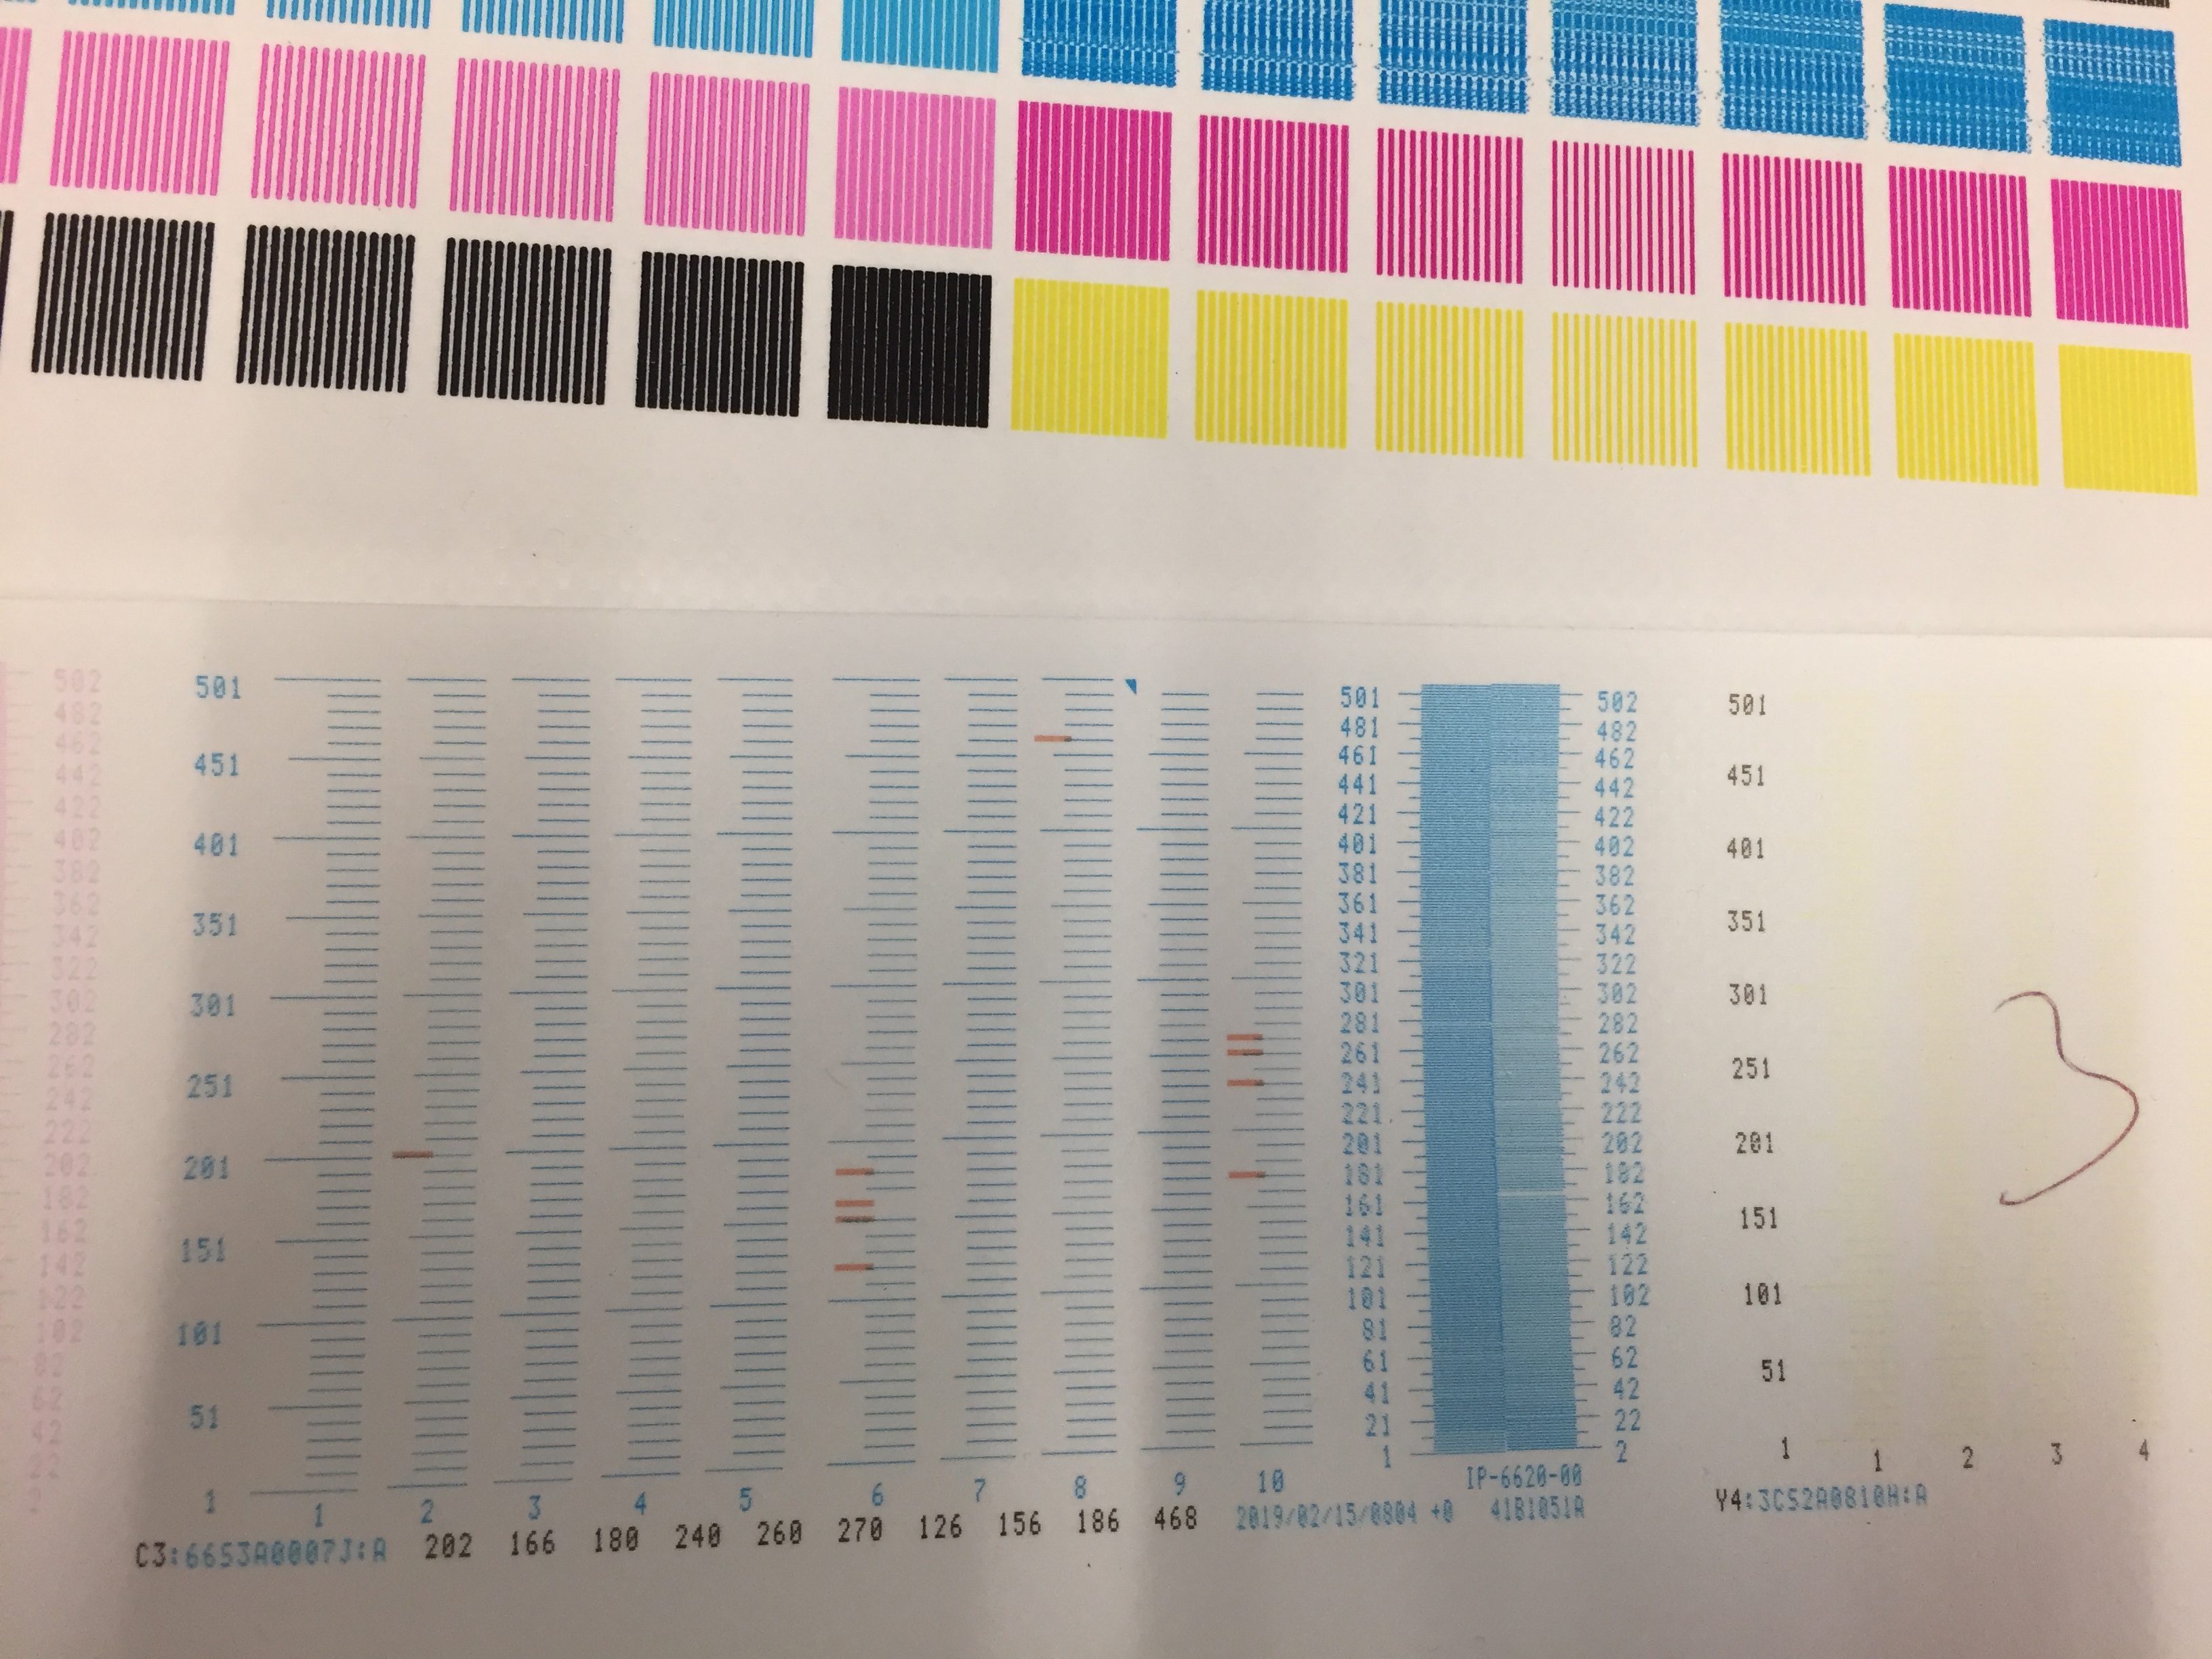 Marine tårn kasket Need Help - OKI COLOR PAINT M64 S PRINT PROBLEMS ON CYAN | Signs101.com:  Largest Forum for Signmaking Professionals